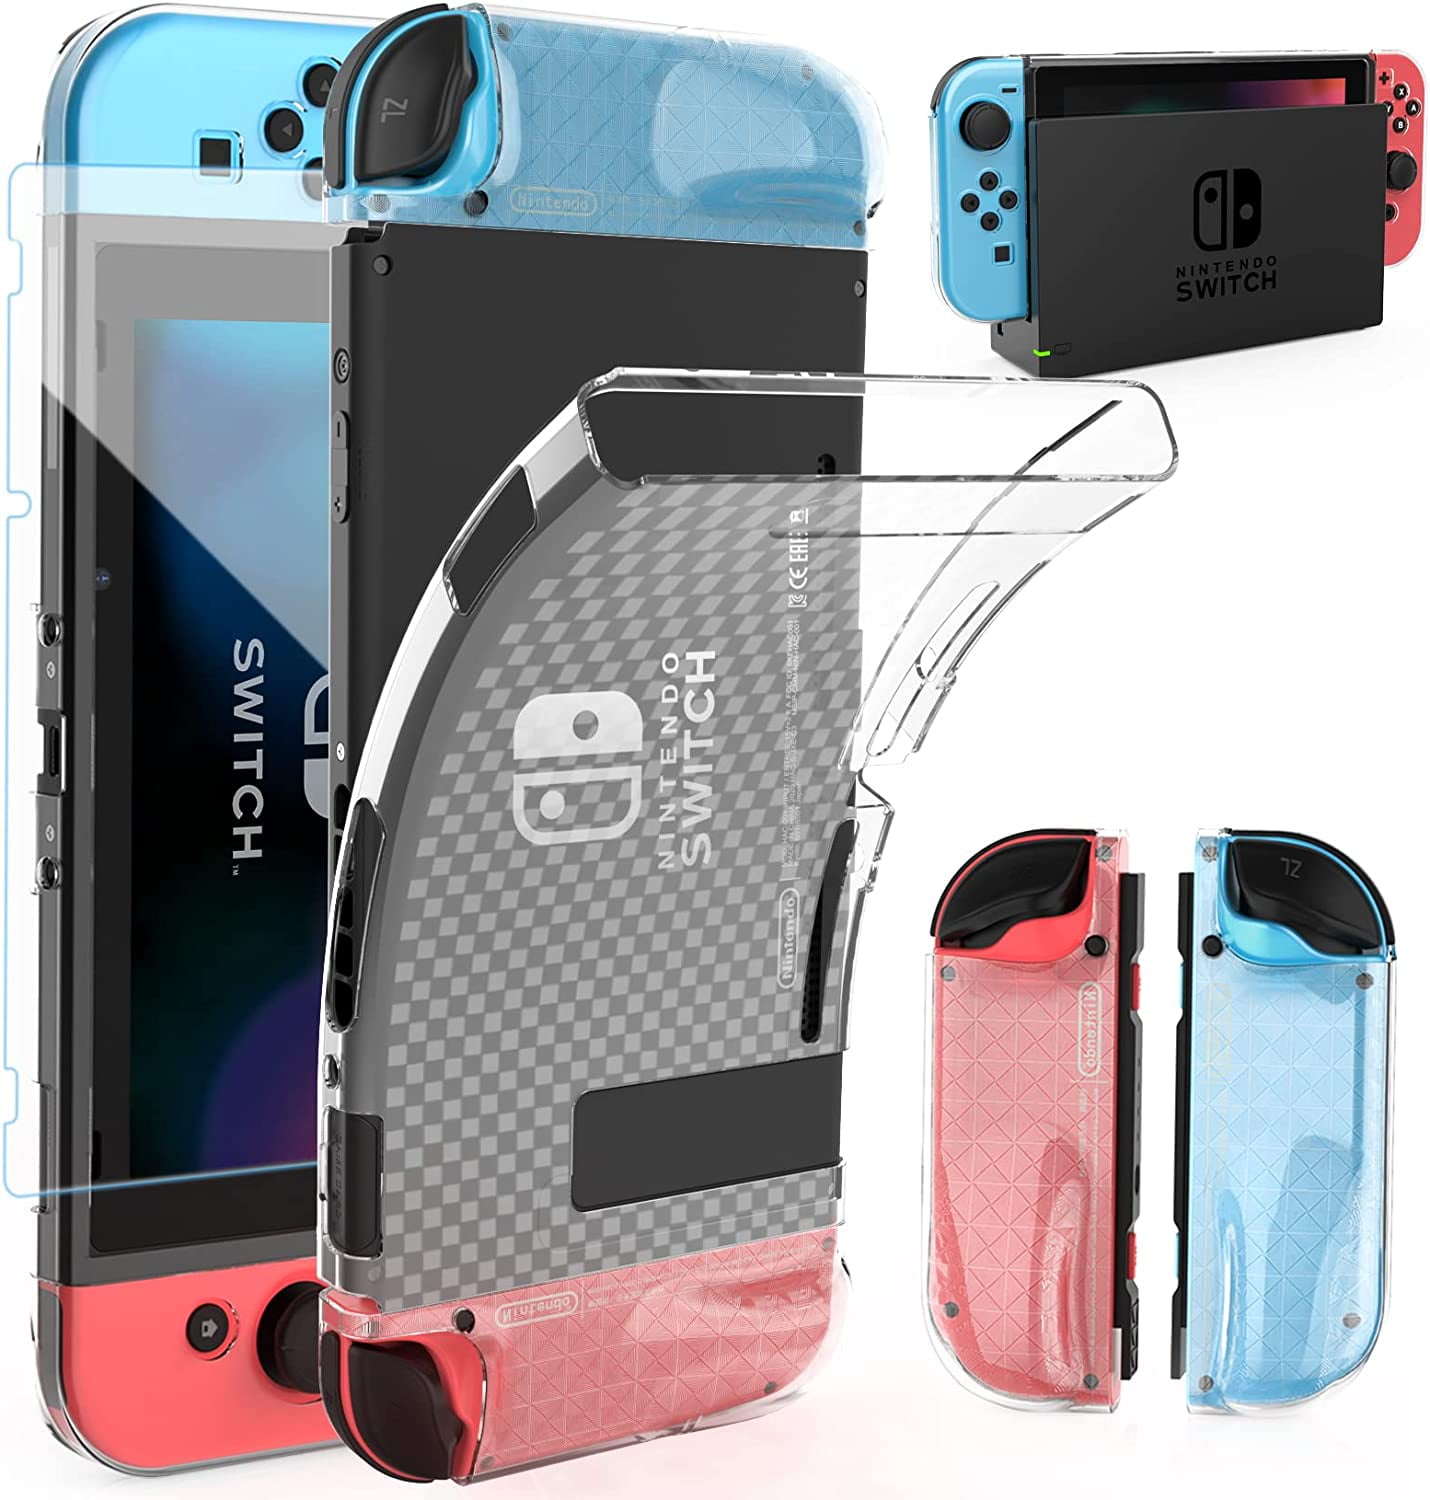 HEYSTOP Case Compatible with Nintendo Switch, Soft TPU Protective Cover for Nintendo Switch with Switch Tempered Glass Screen Protector and 6 Thumb Grip Caps Walmart.com